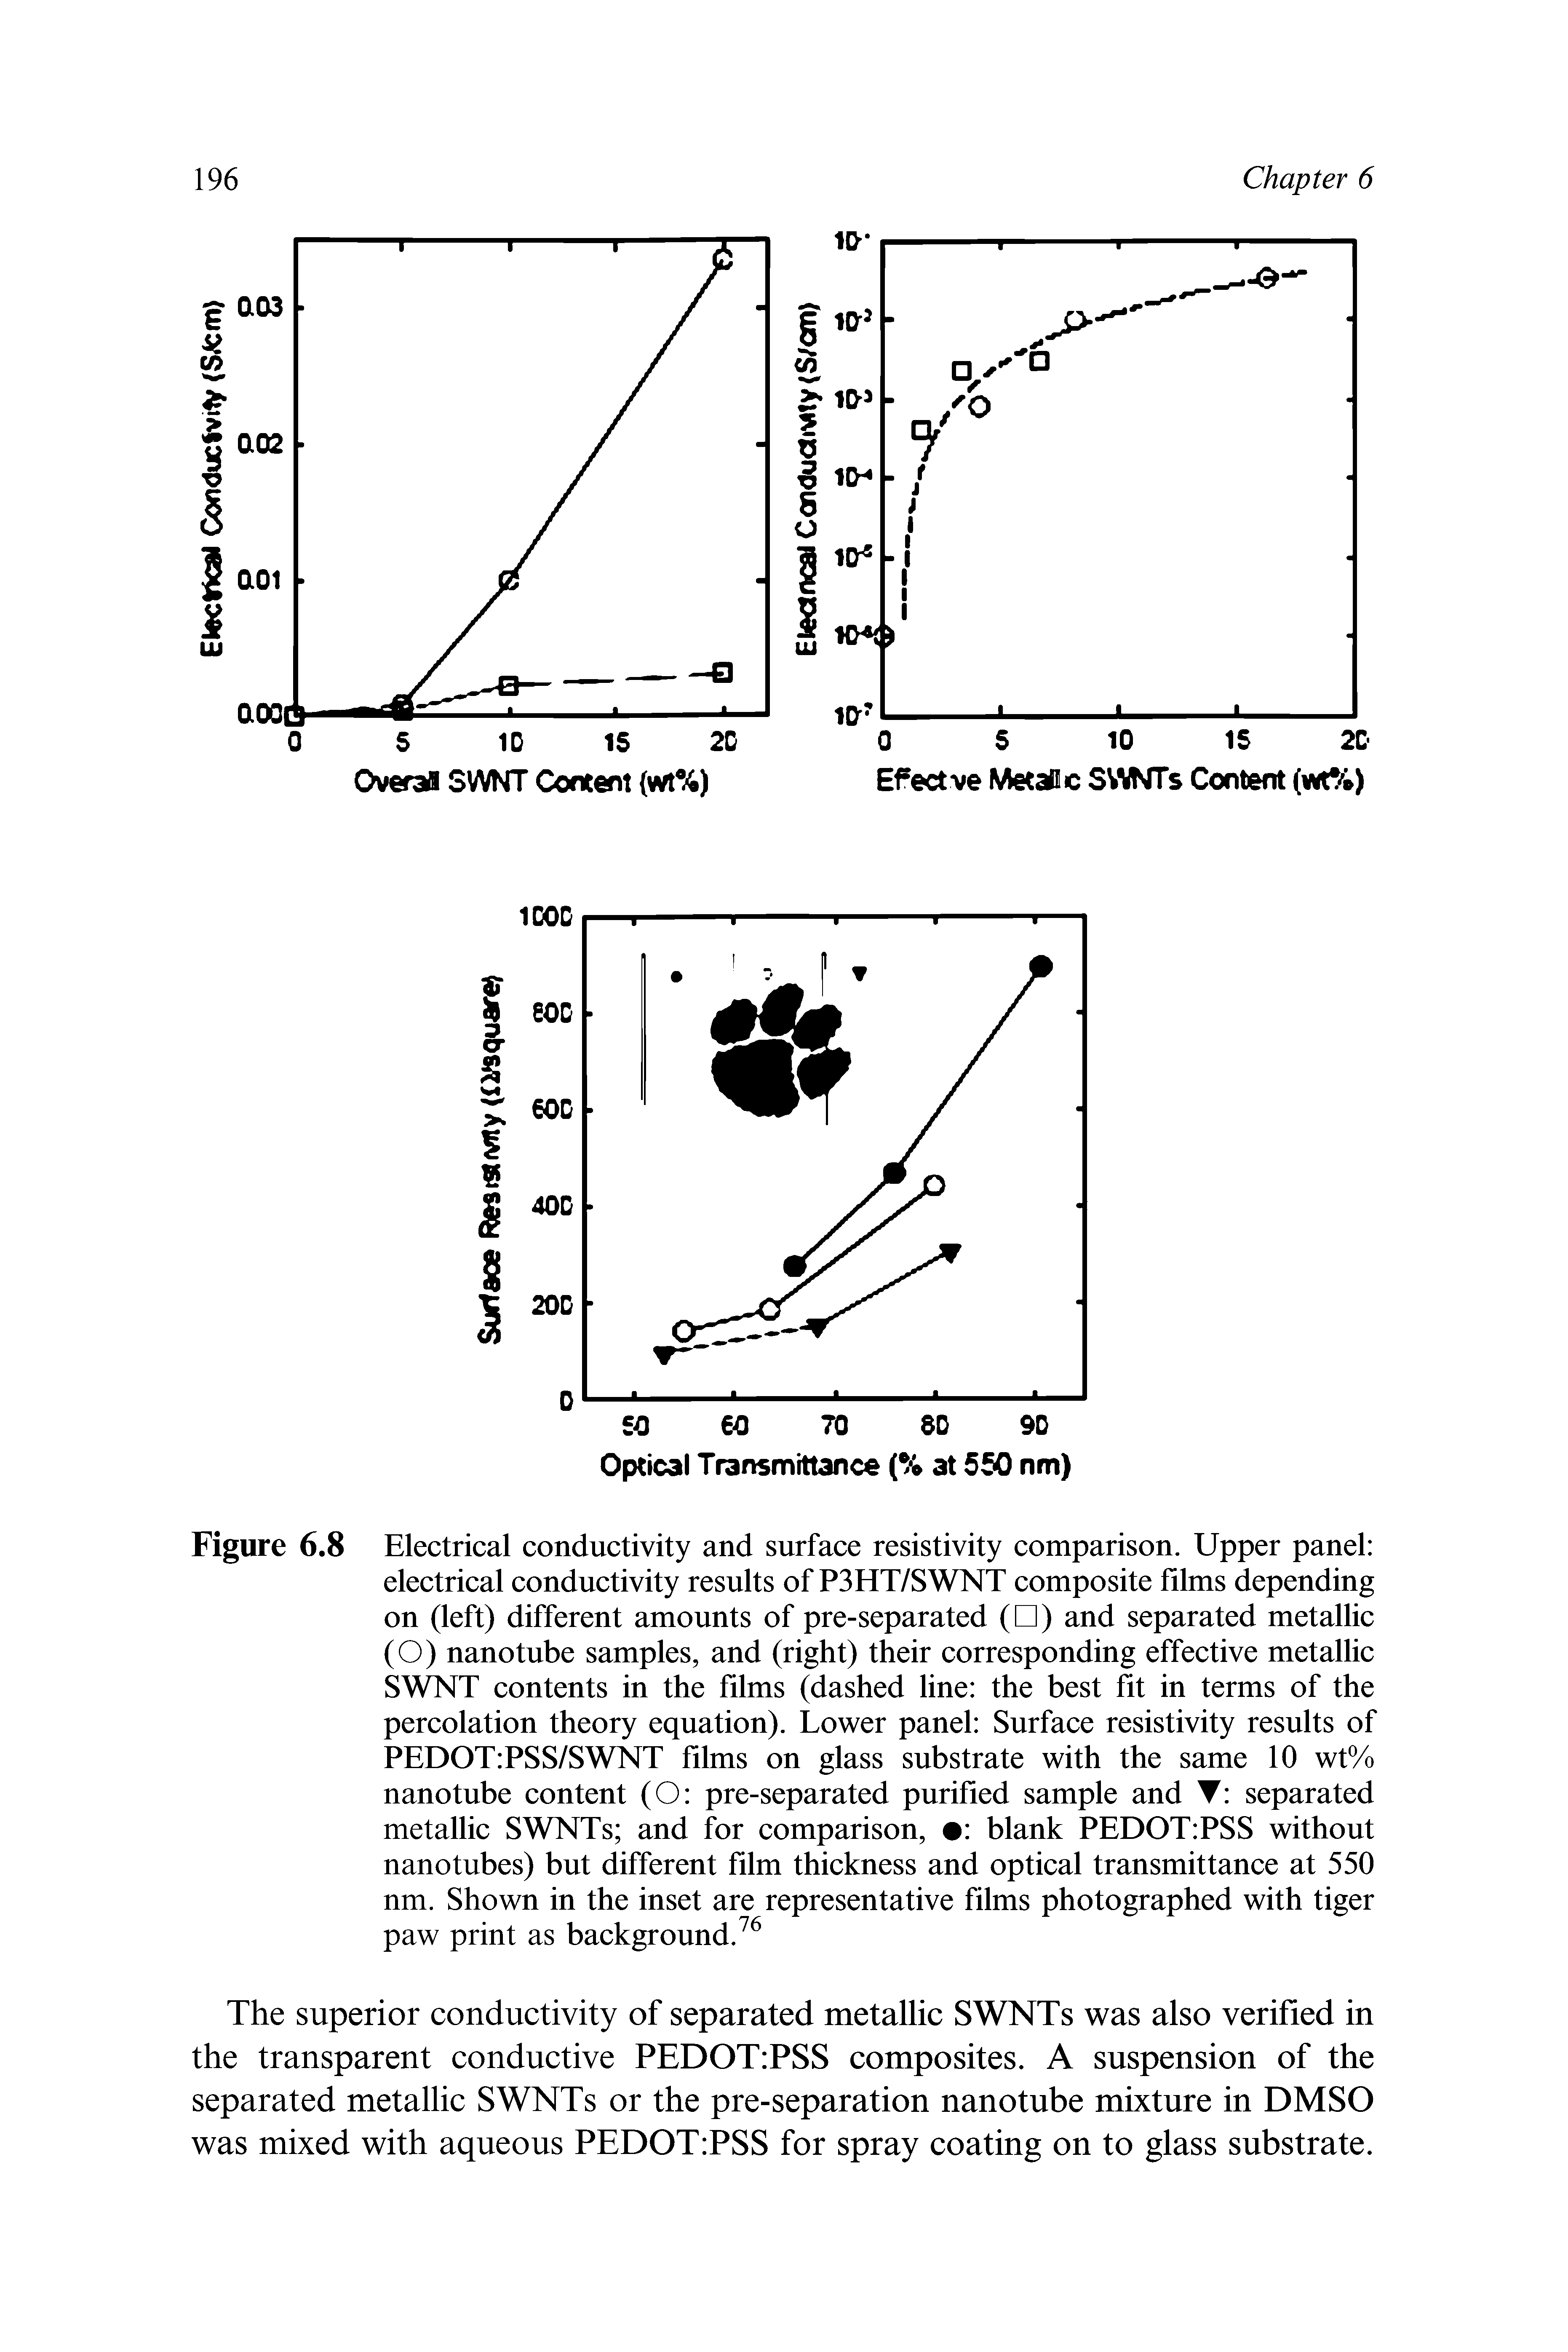 Figure 6.8 Electrical conductivity and surface resistivity comparison. Upper panel electrical conductivity results of P3HT/SWNT composite films depending on (left) different amounts of pre-separated ( ) and separated metallic (O) nanotube samples, and (right) their corresponding effective metallic SWNT contents in the films (dashed line the best fit in terms of the percolation theory equation). Lower panel Surface resistivity results of PEDOT PSS/SWNT films on glass substrate with the same 10 wt% nano tube content (O pre-separated purified sample and T separated metallic SWNTs and for comparison, blank PEDOT PSS without nano tubes) but different film thickness and optical transmittance at 550 nm. Shown in the inset are representative films photographed with tiger paw print as background.